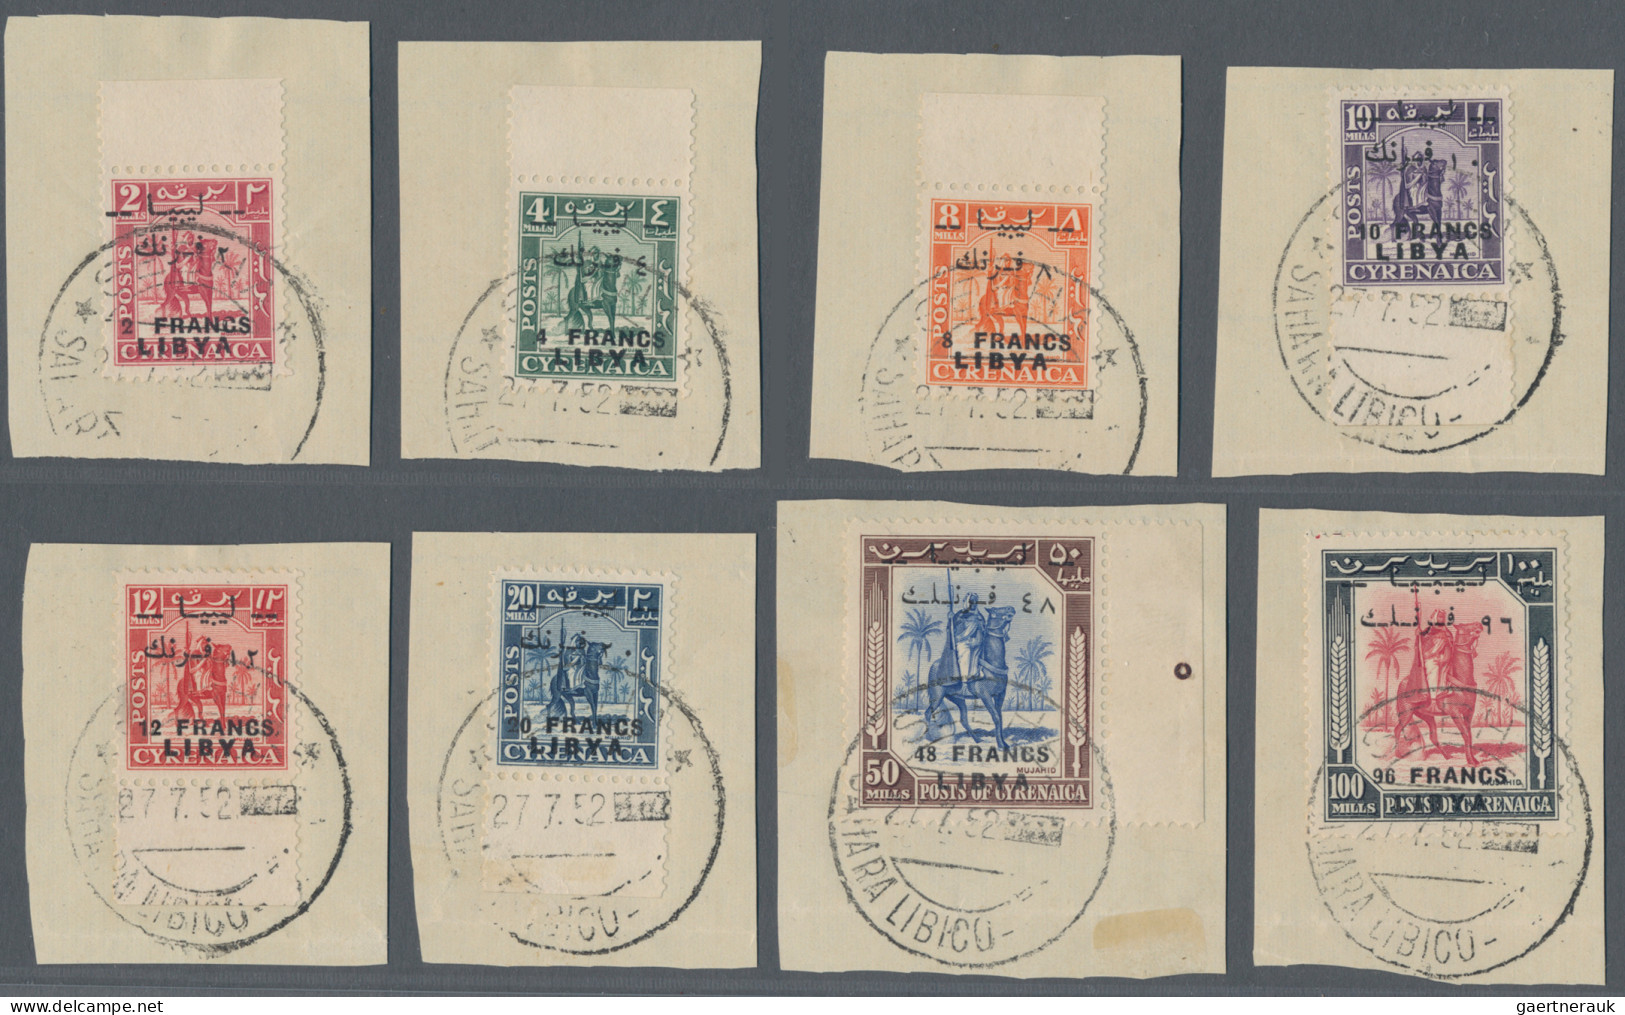 Libya: 1951, First Issue "Camel Trooper" Overprinted "LIBYA" And French Currency - Libië